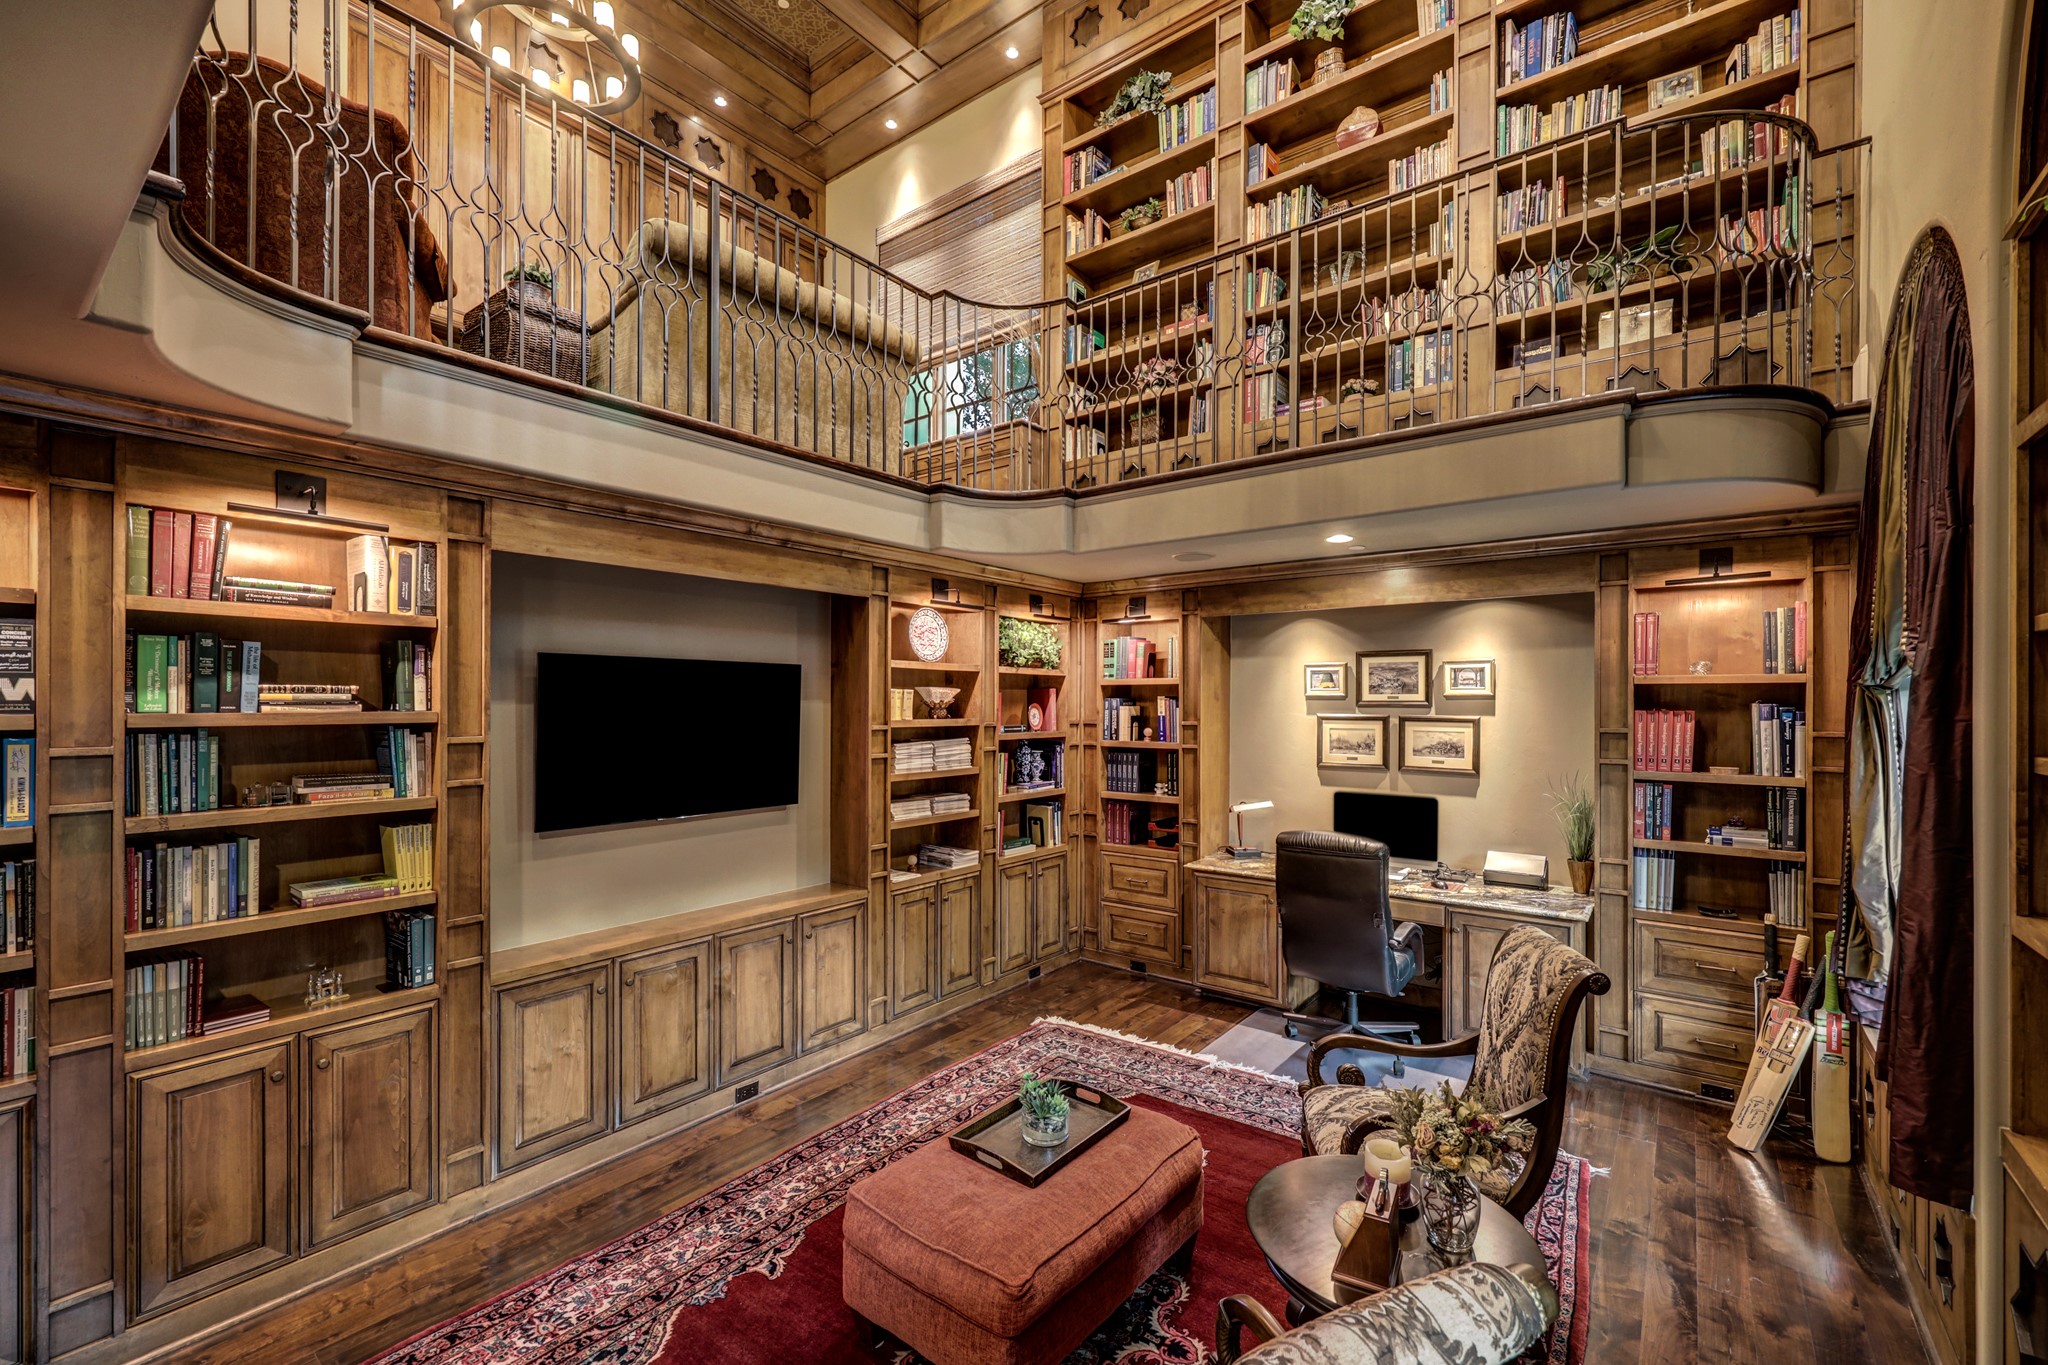 Surrounded by custom wooden book shelving, built-ins and cabinets